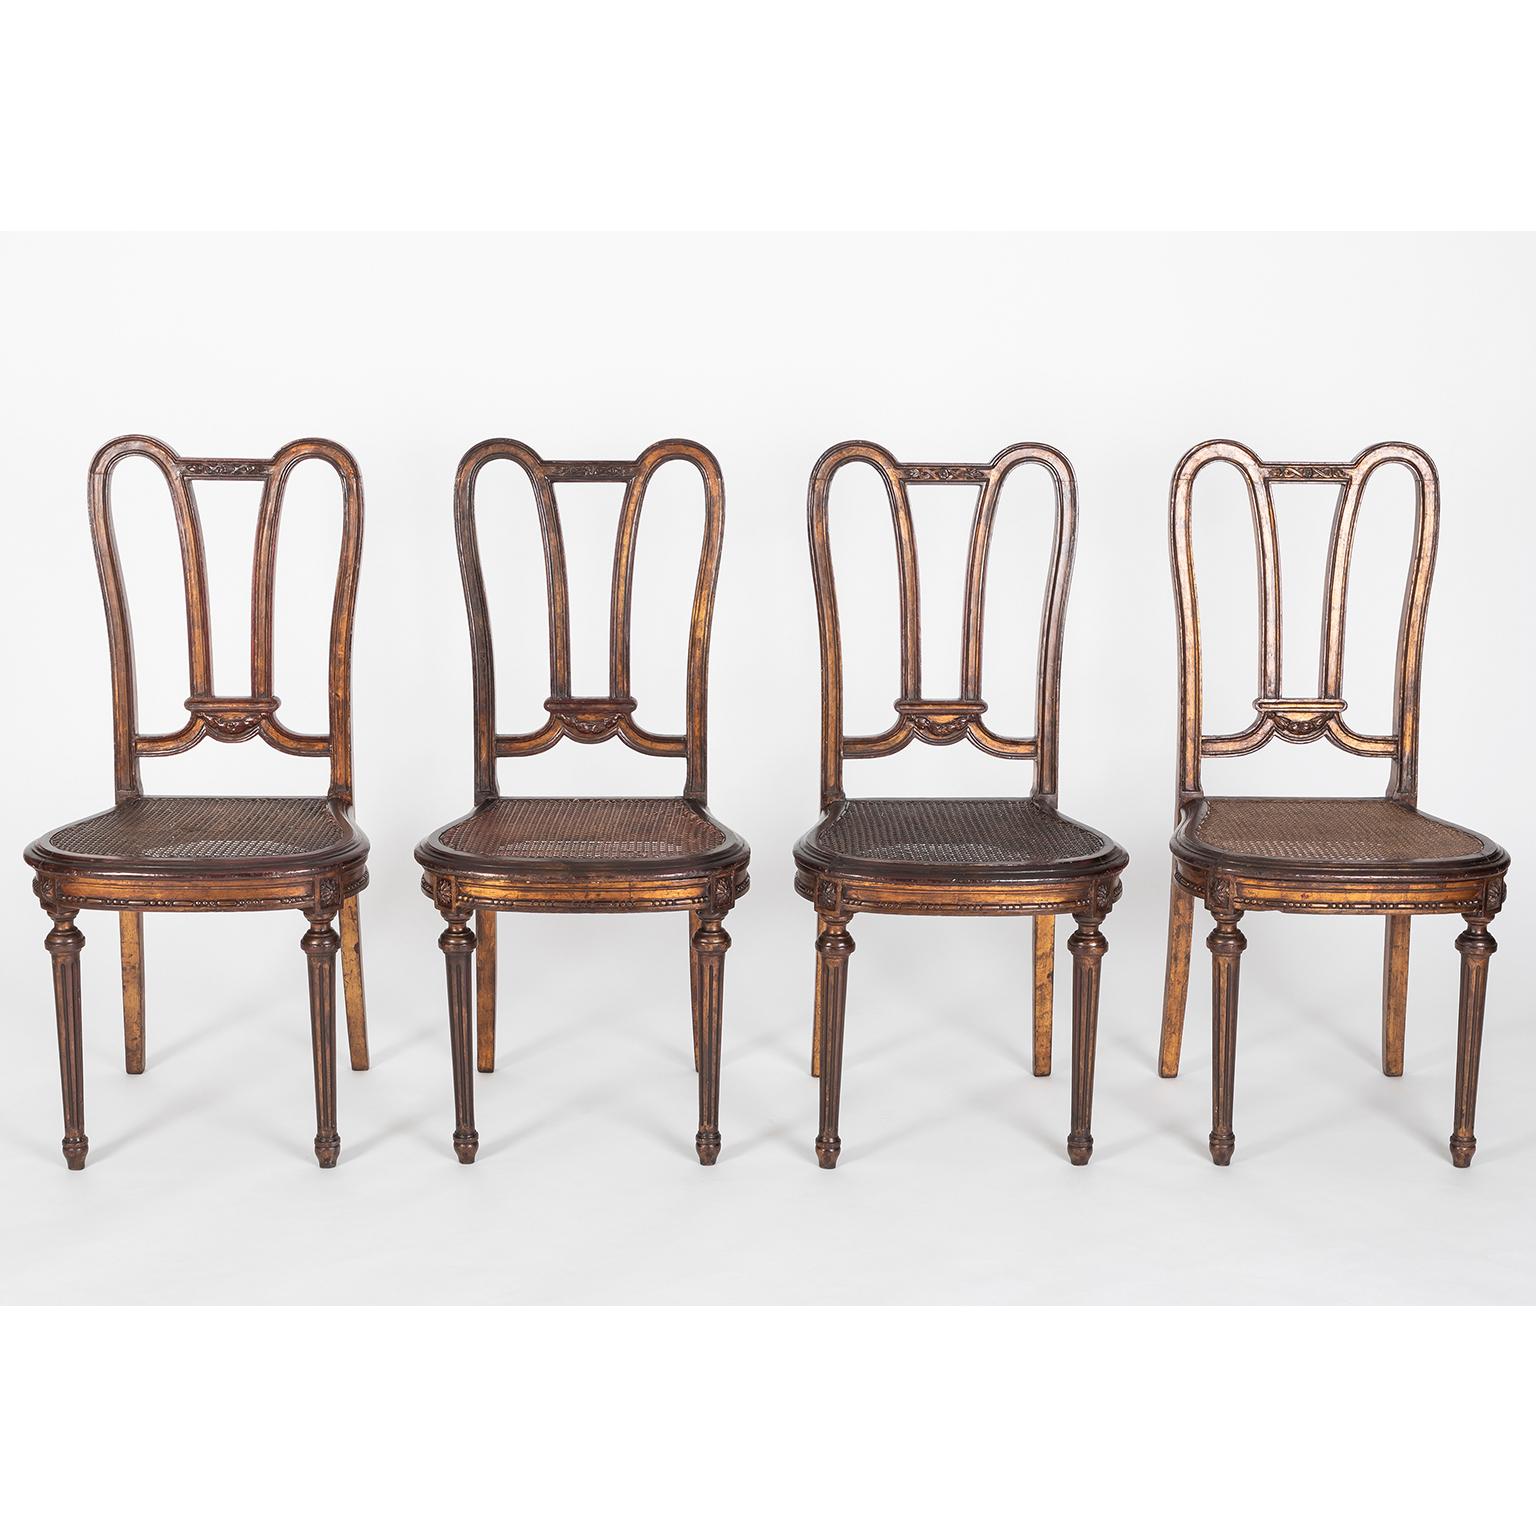 A set of fourteen Louis XVI style dining chairs in carved painted wood with canned seats with a wonderful patina.
Made in France, early 20th century

Dimensions: Width 46 cm; depth 45cm; total height 96 cm; seat height 45 cm.